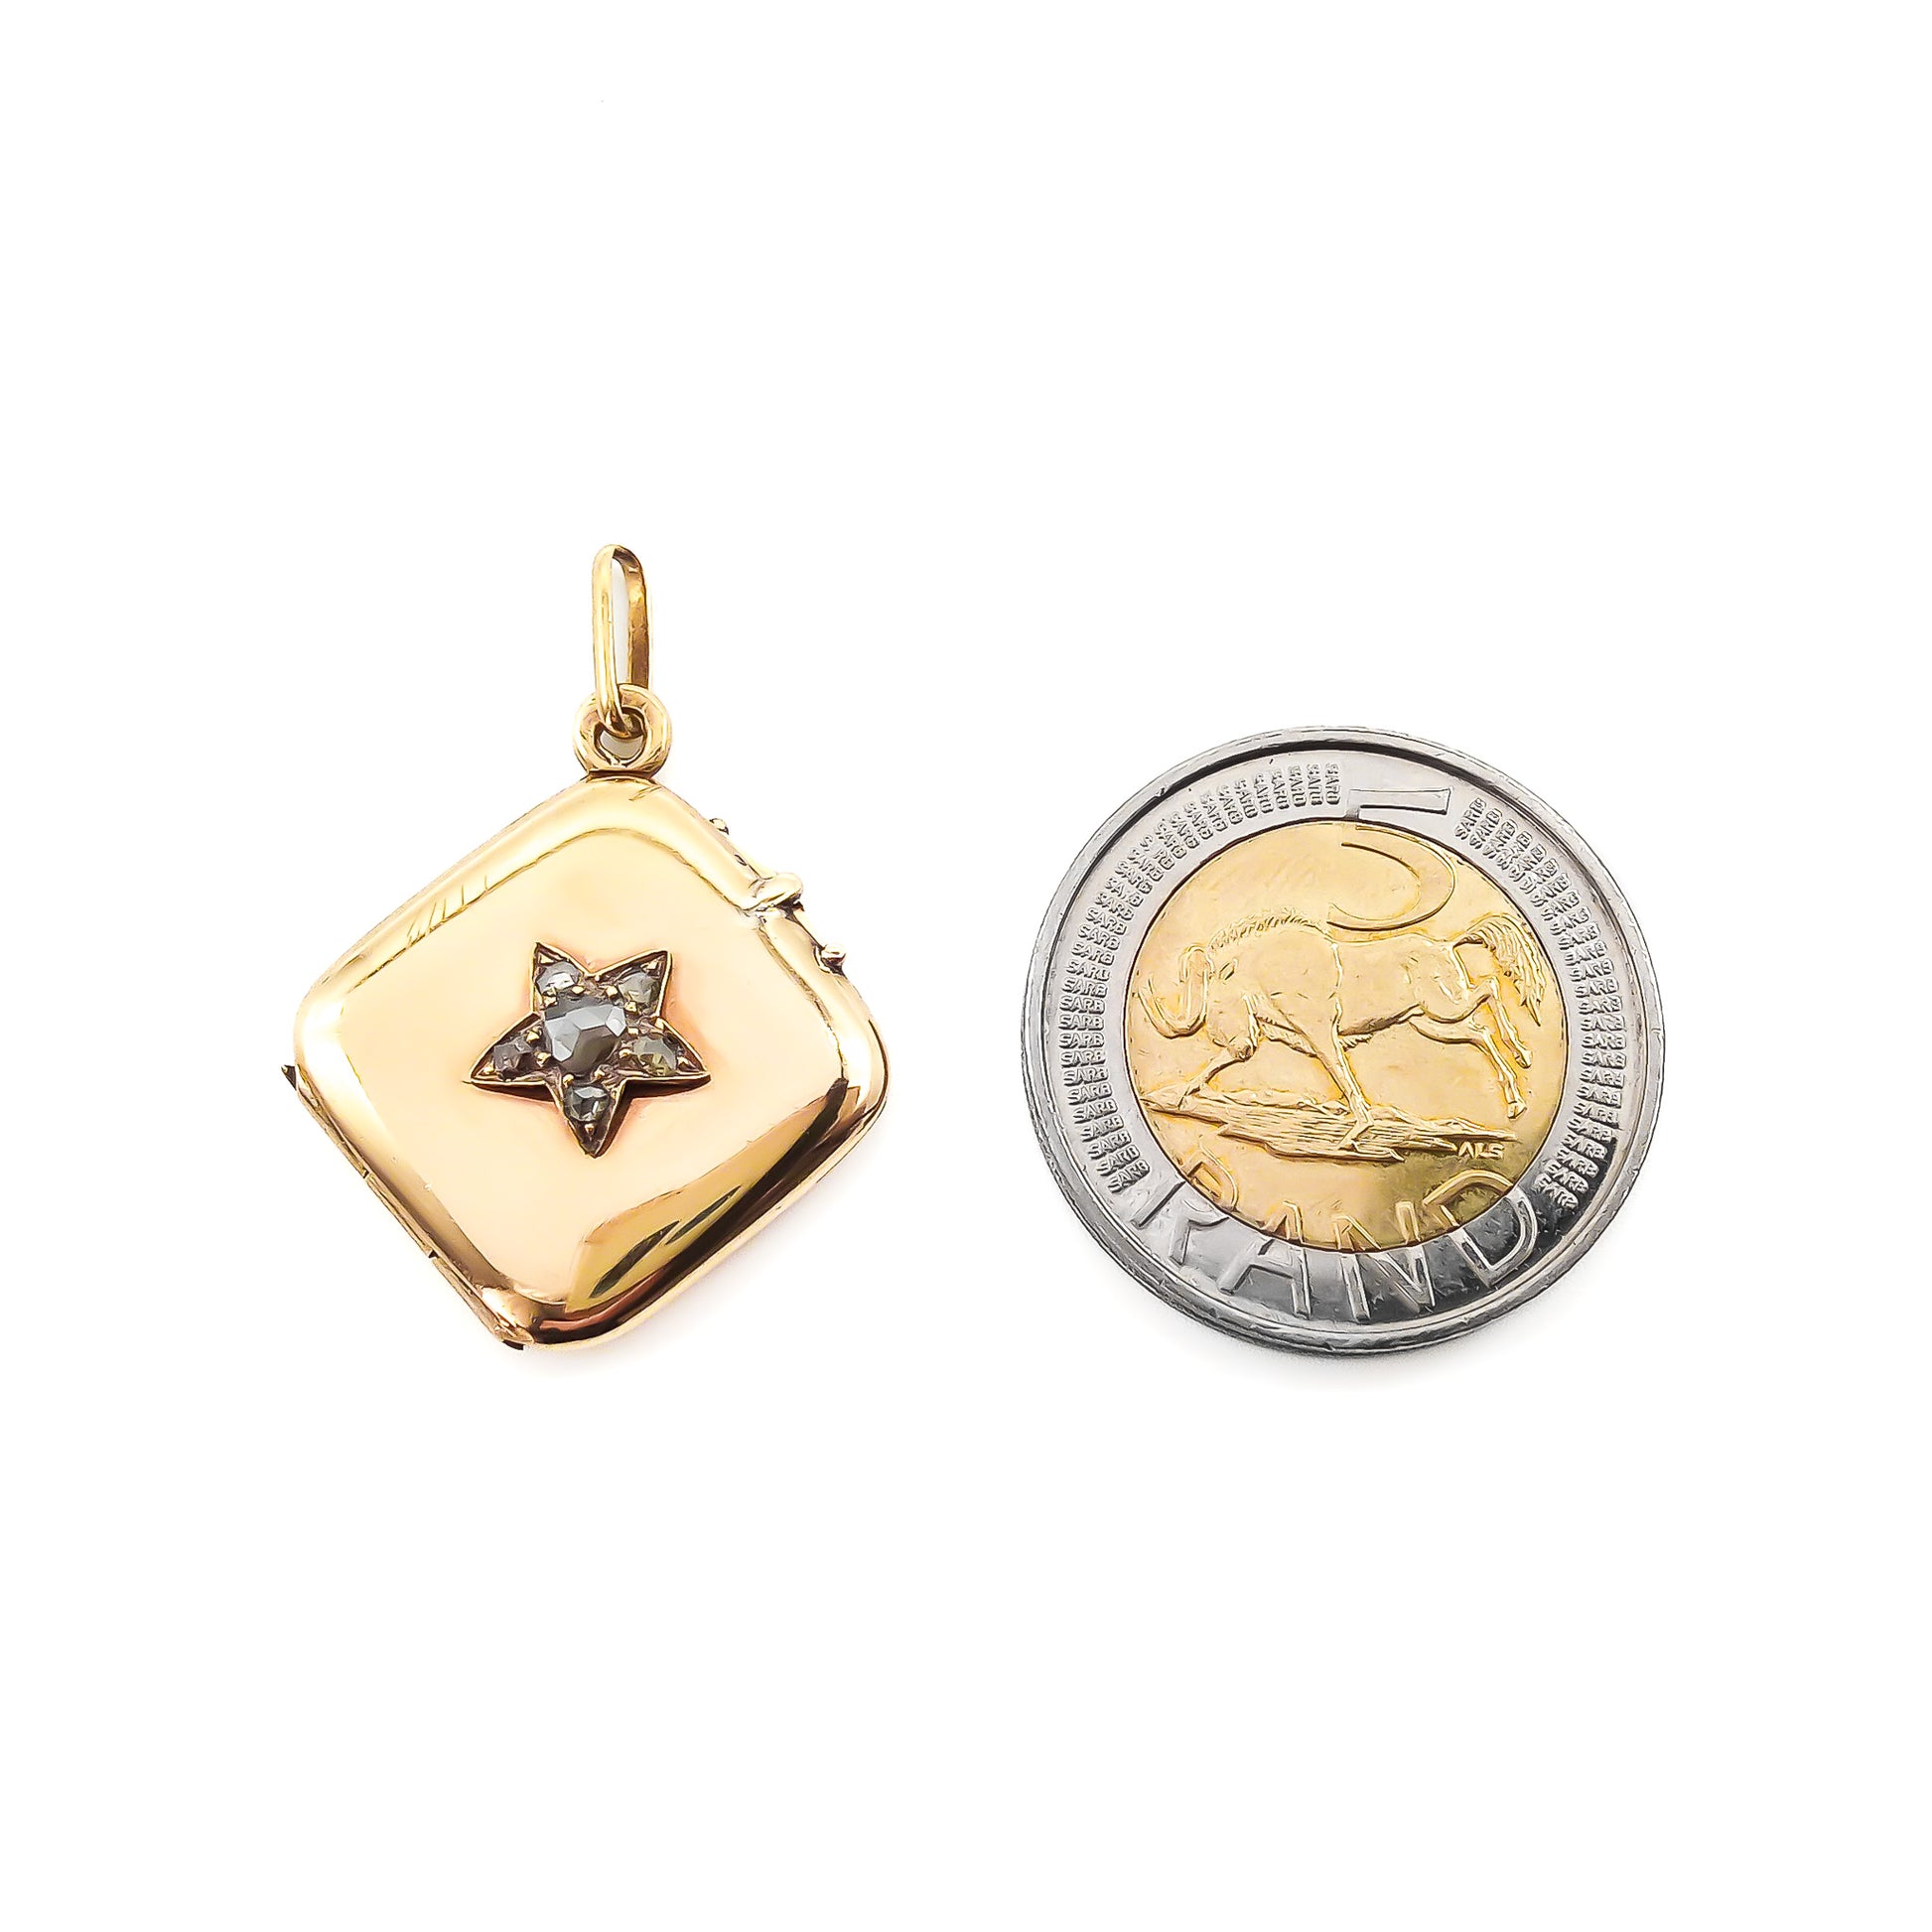 Charming Victorian 18ct yellow gold locket set with six rose cut diamonds in the form of a star. Circa 1900